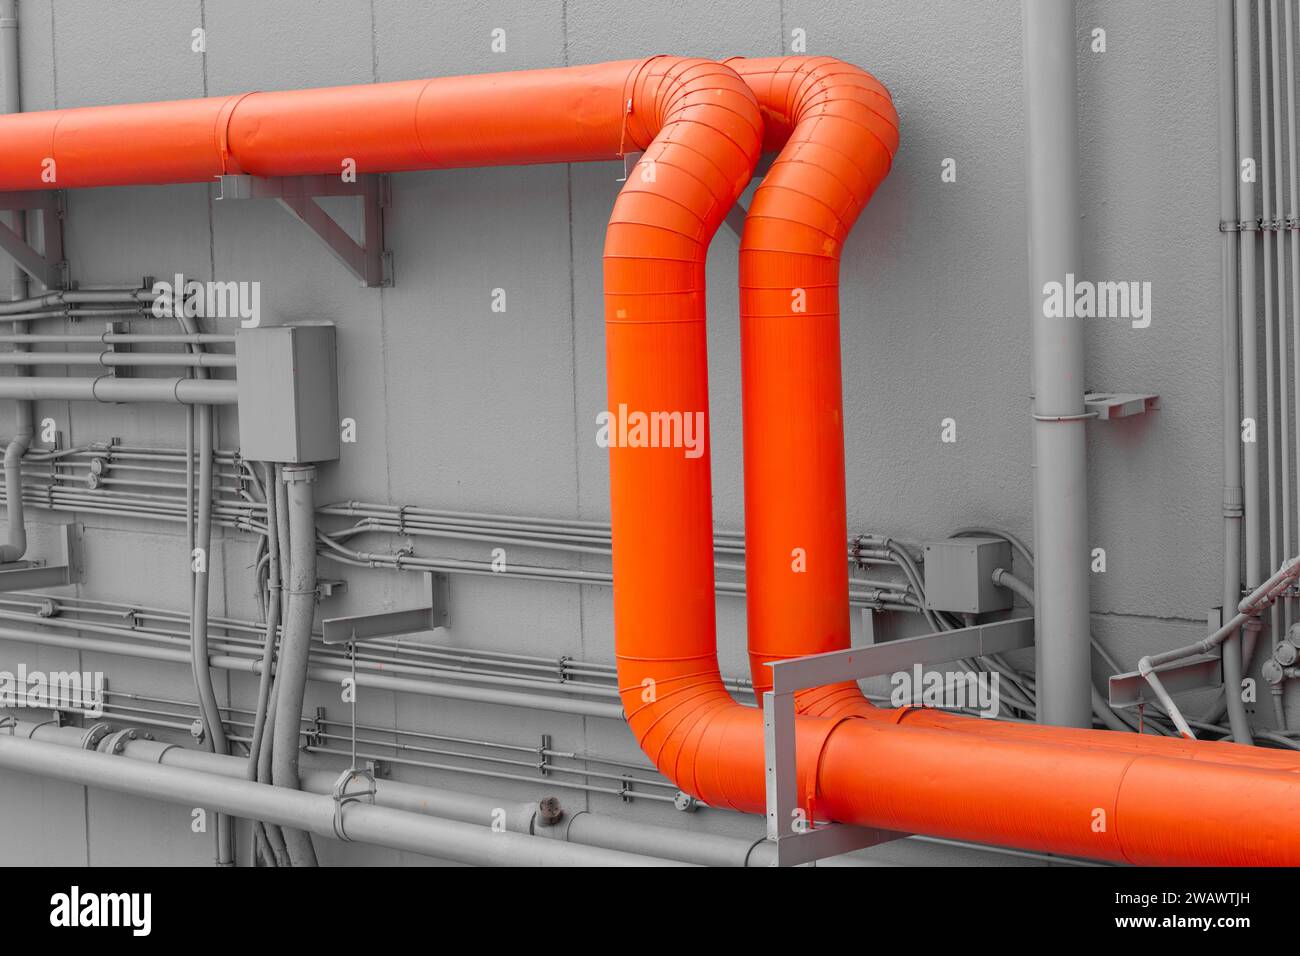 Water pipes , Air pipe, low pressure watering system pipe, piping engineering construction design in commercial building. Stock Photo